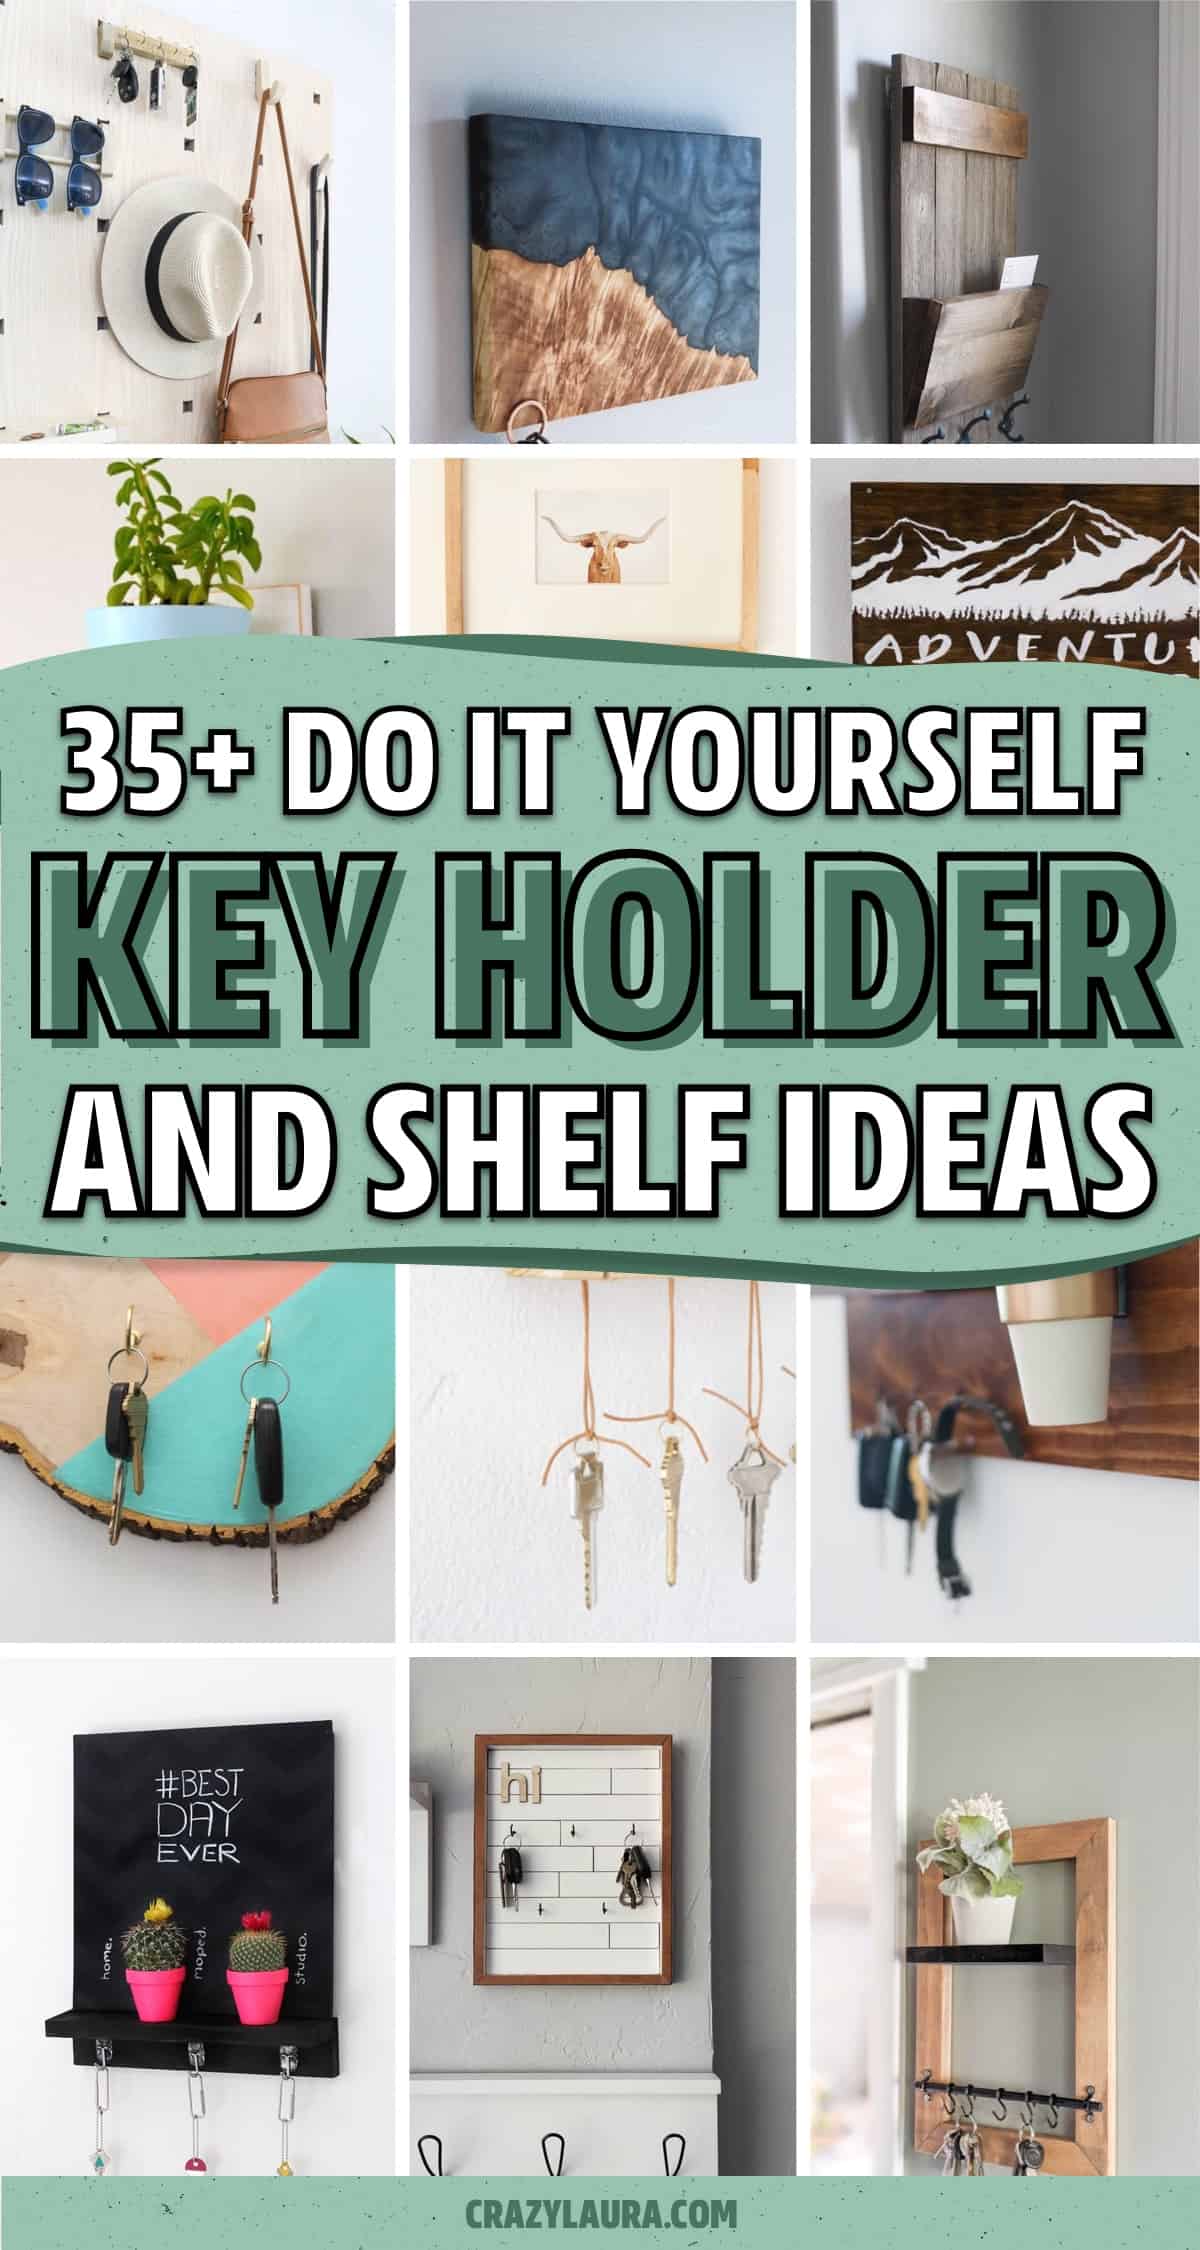 free key holder plans to build